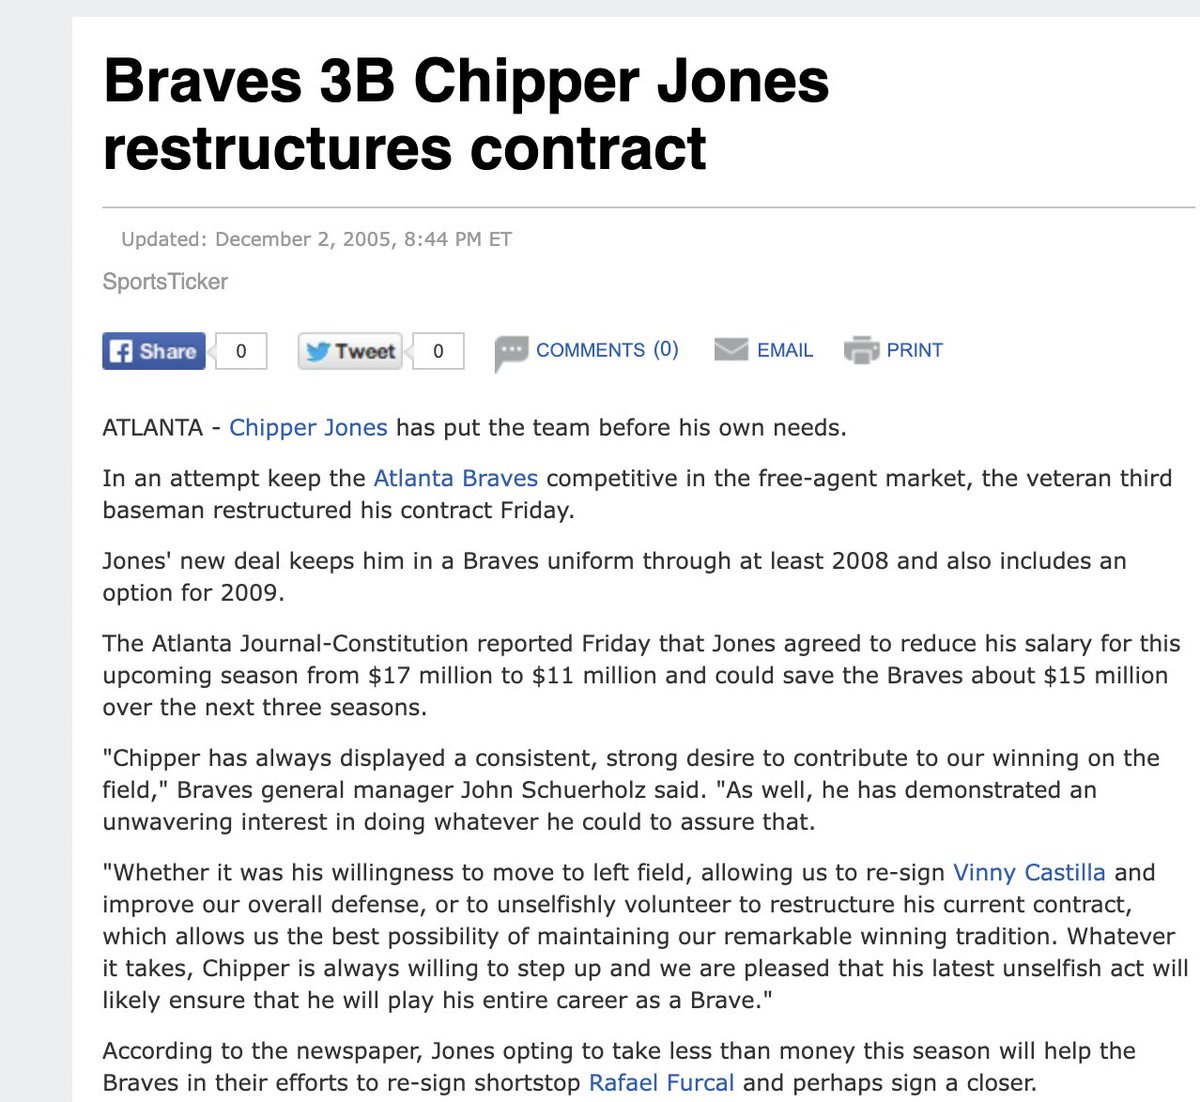 At 32 years old, Freddie Freeman is at an impasse over a sixth year on a contract. At 33 years old, Chipper Jones restructured his contract to help the Braves sign more talent. Chipper really is a franchise legend.